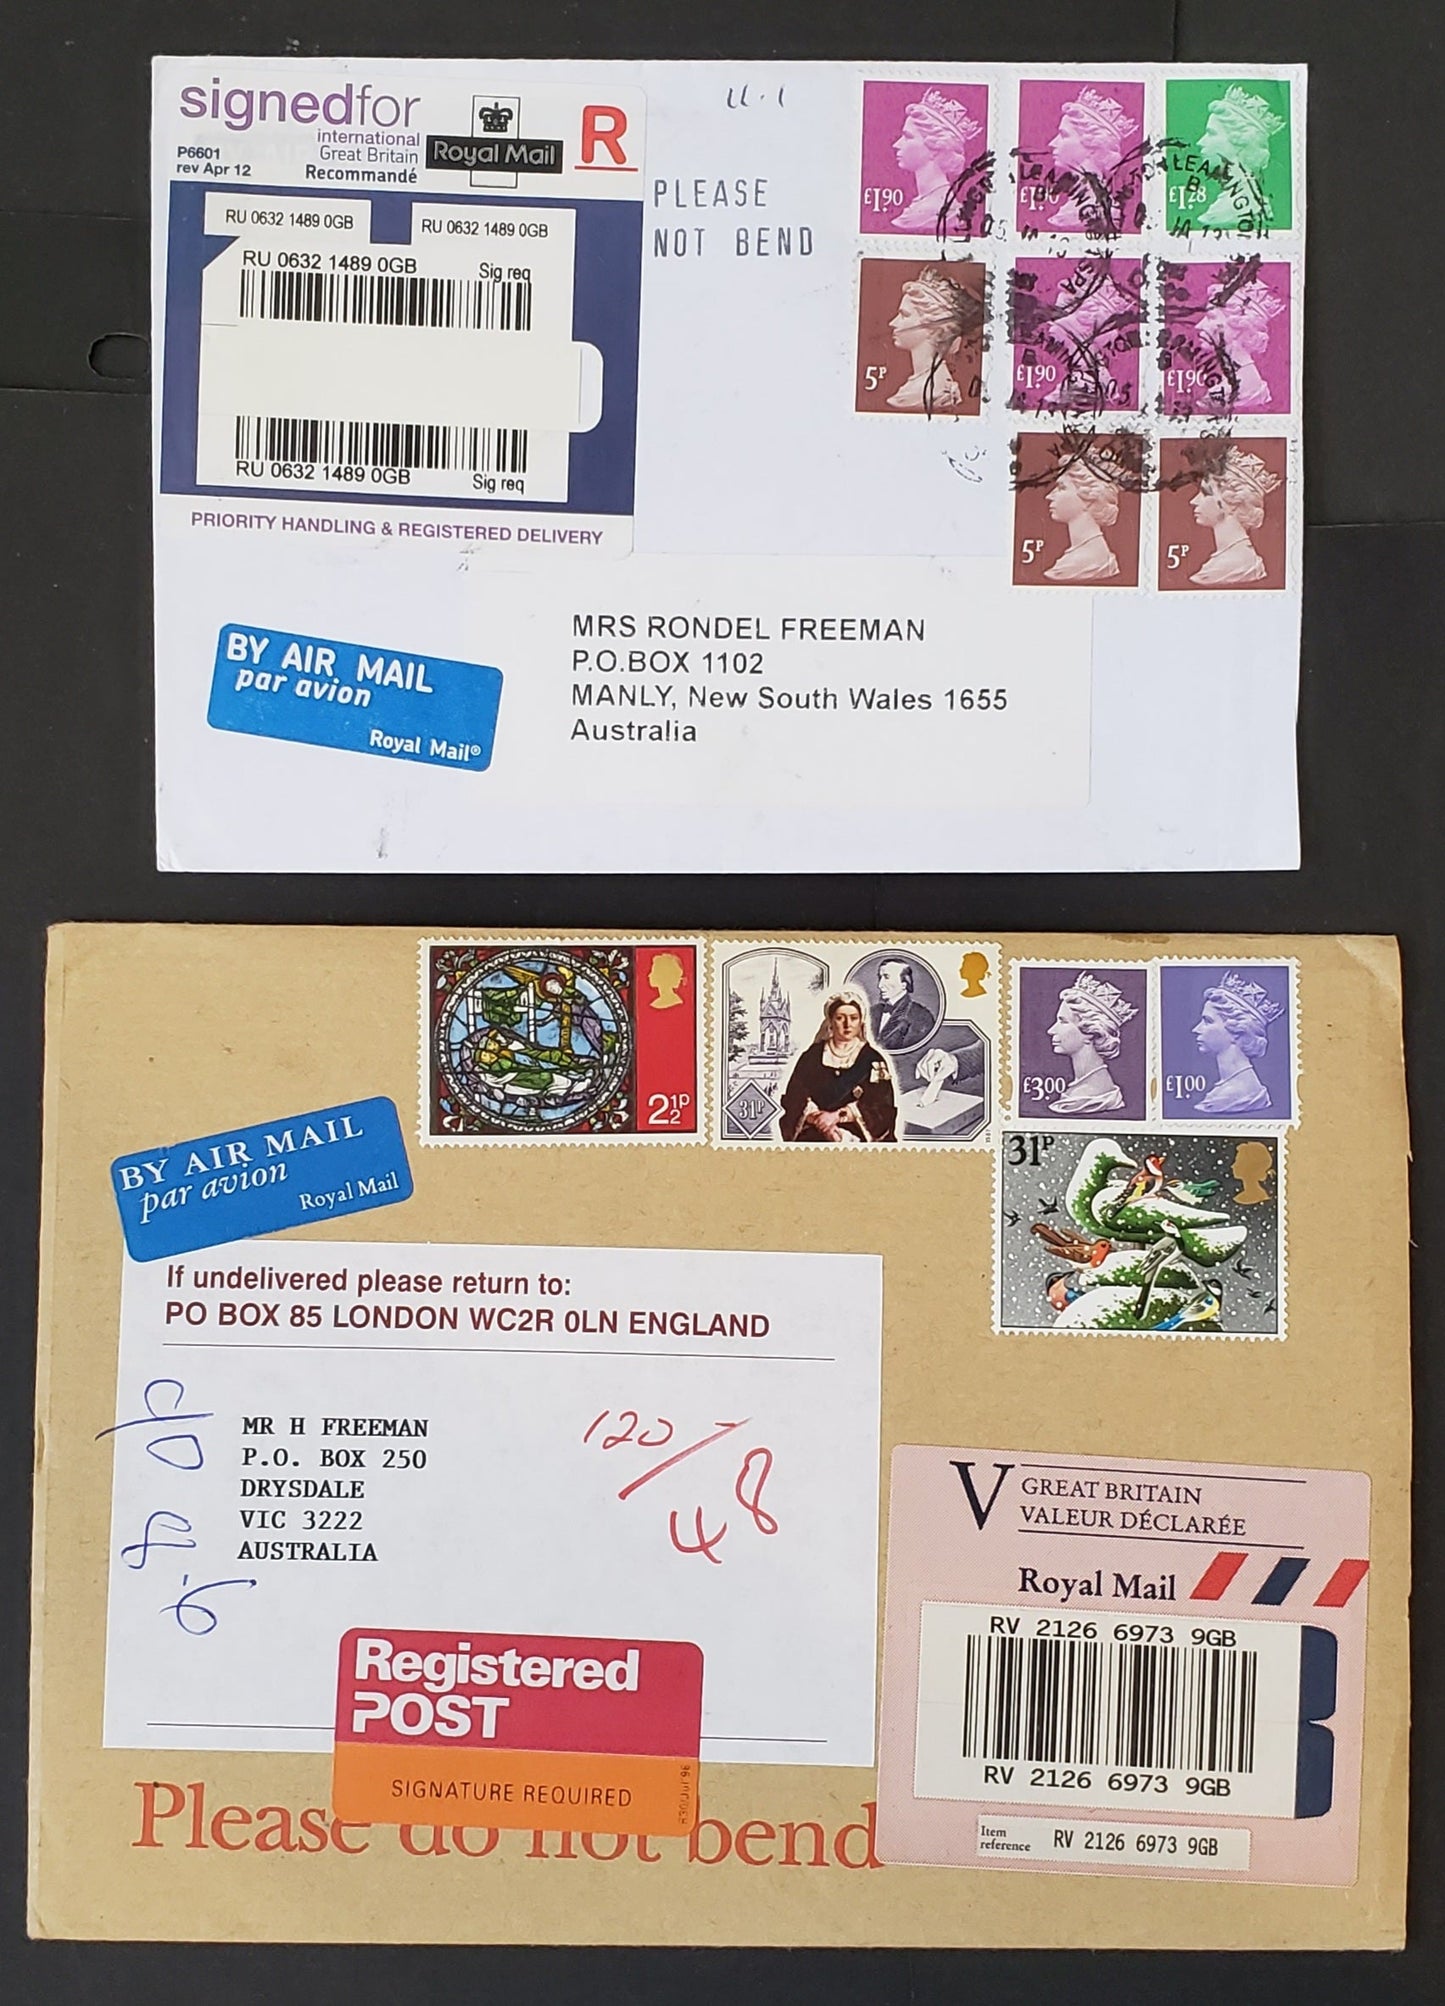 Lot 344  Great Britain 1999-2006 Decimal Machin Covers, Two Registered Covers to Australia Franked With Better security Machins, Net. Est. $20.